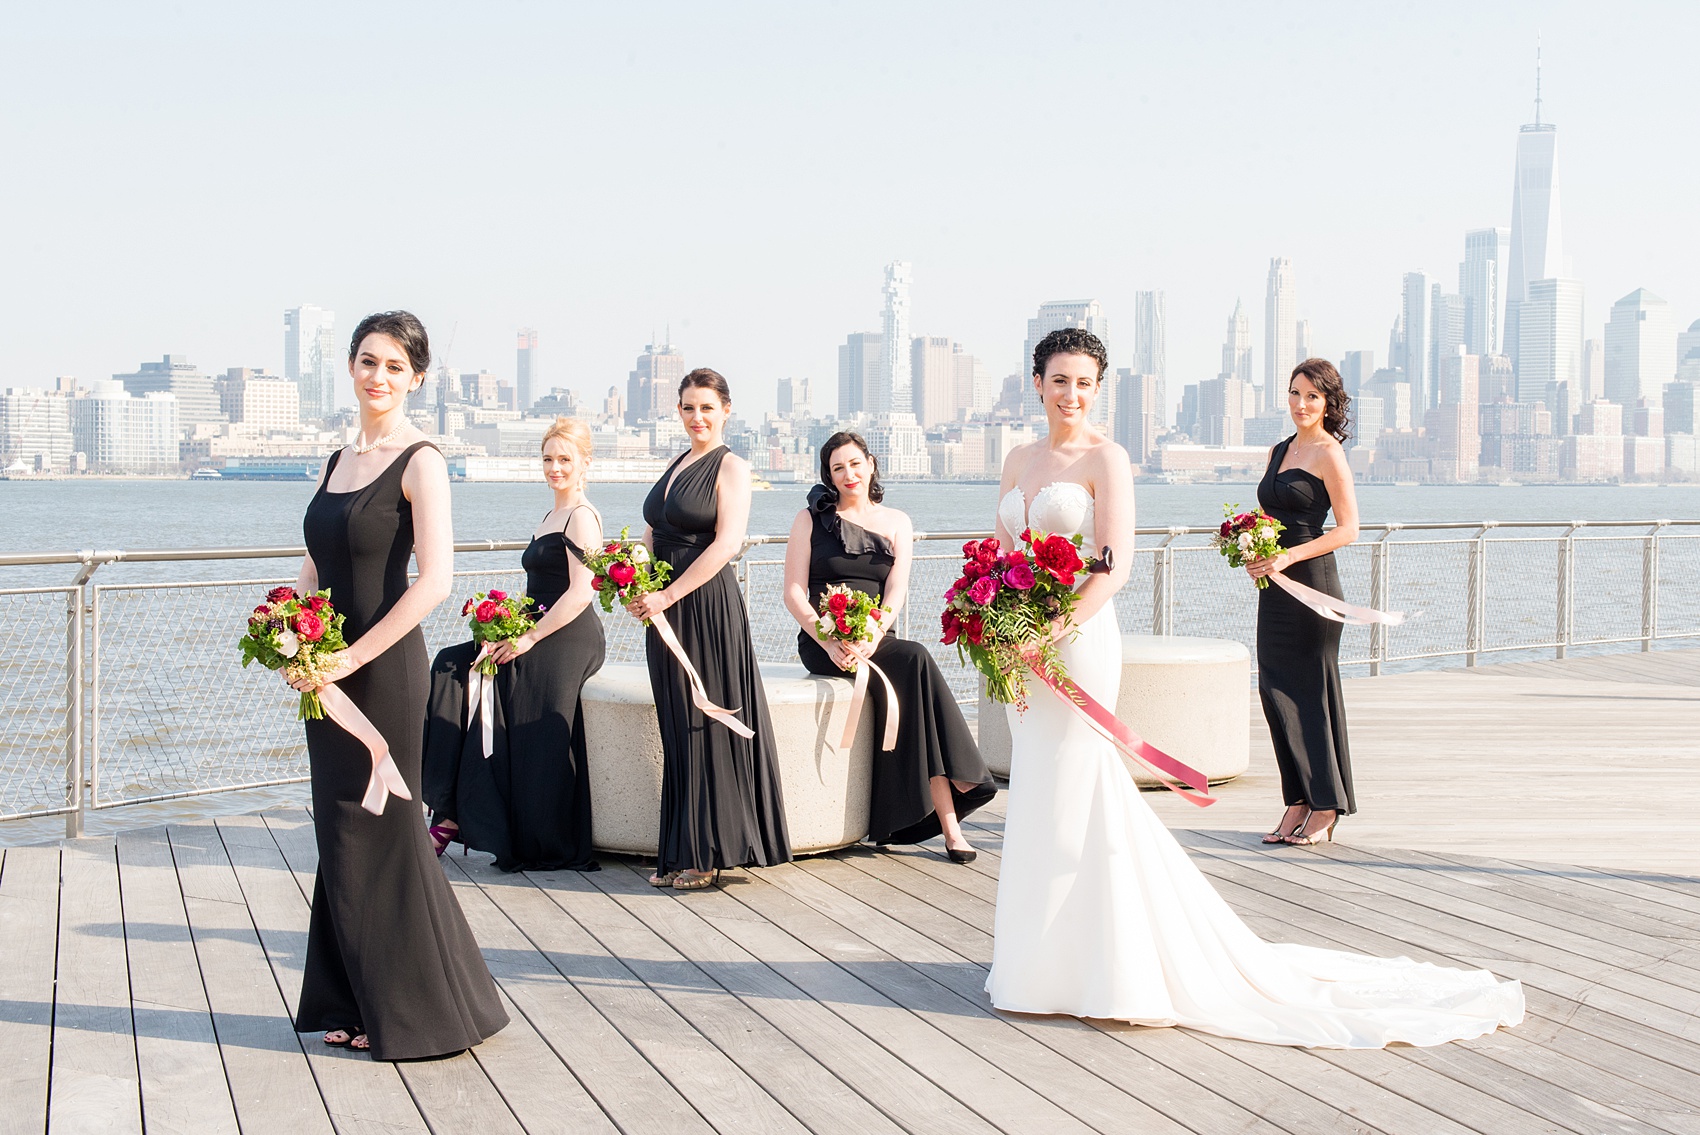 W Hoboken wedding photos at this New Jersey hotel overlooking the NYC skyline. Vogue like photo by Mikkel Paige Photography of the bridal party in black gowns carrying romantic bouquets in red and pink and long ribbons blowing in the breeze. #mikkelpaige #HobokenWedding #NewJerseyPhotographer #NewYorkCityPhotographer #NYCweddingphotographer #brideandgroomphotos #redpeonies #romanticwedding #springwedding #CityWedding